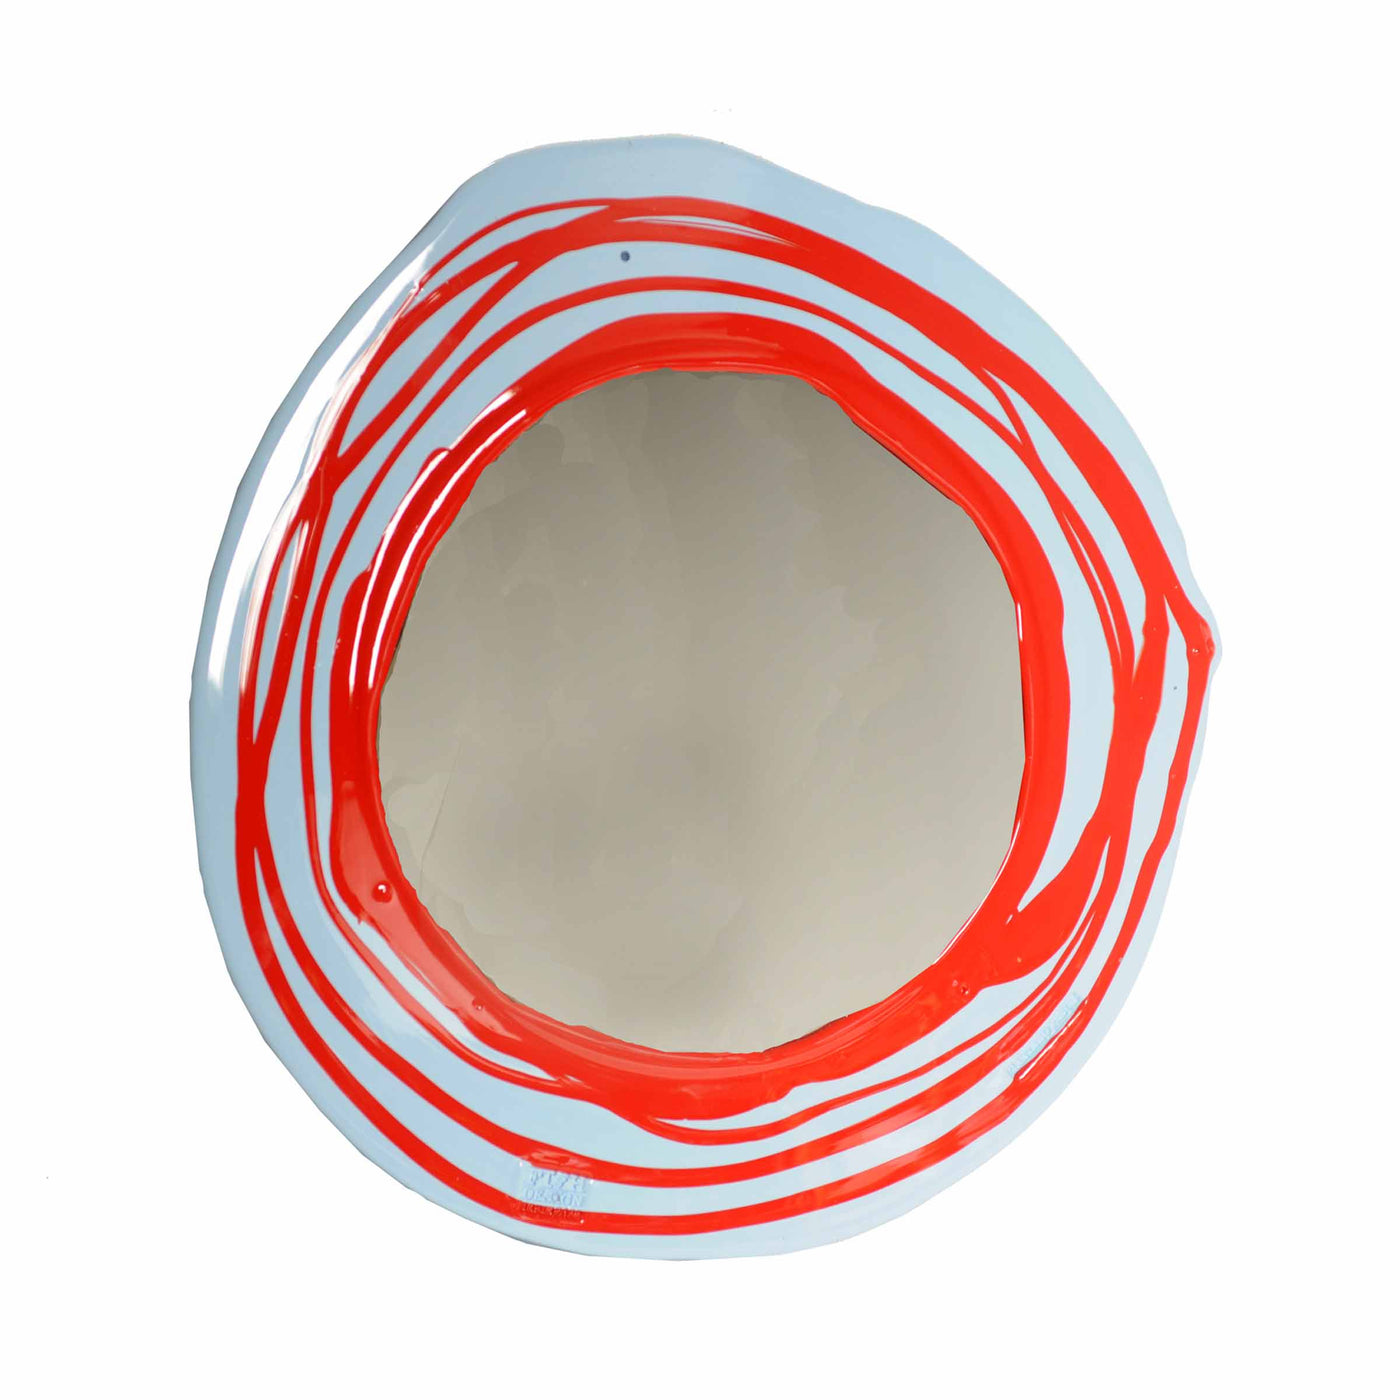 Resin Mirror ROUND MIRROR Red by Gaetano Pesce for Fish Design 02